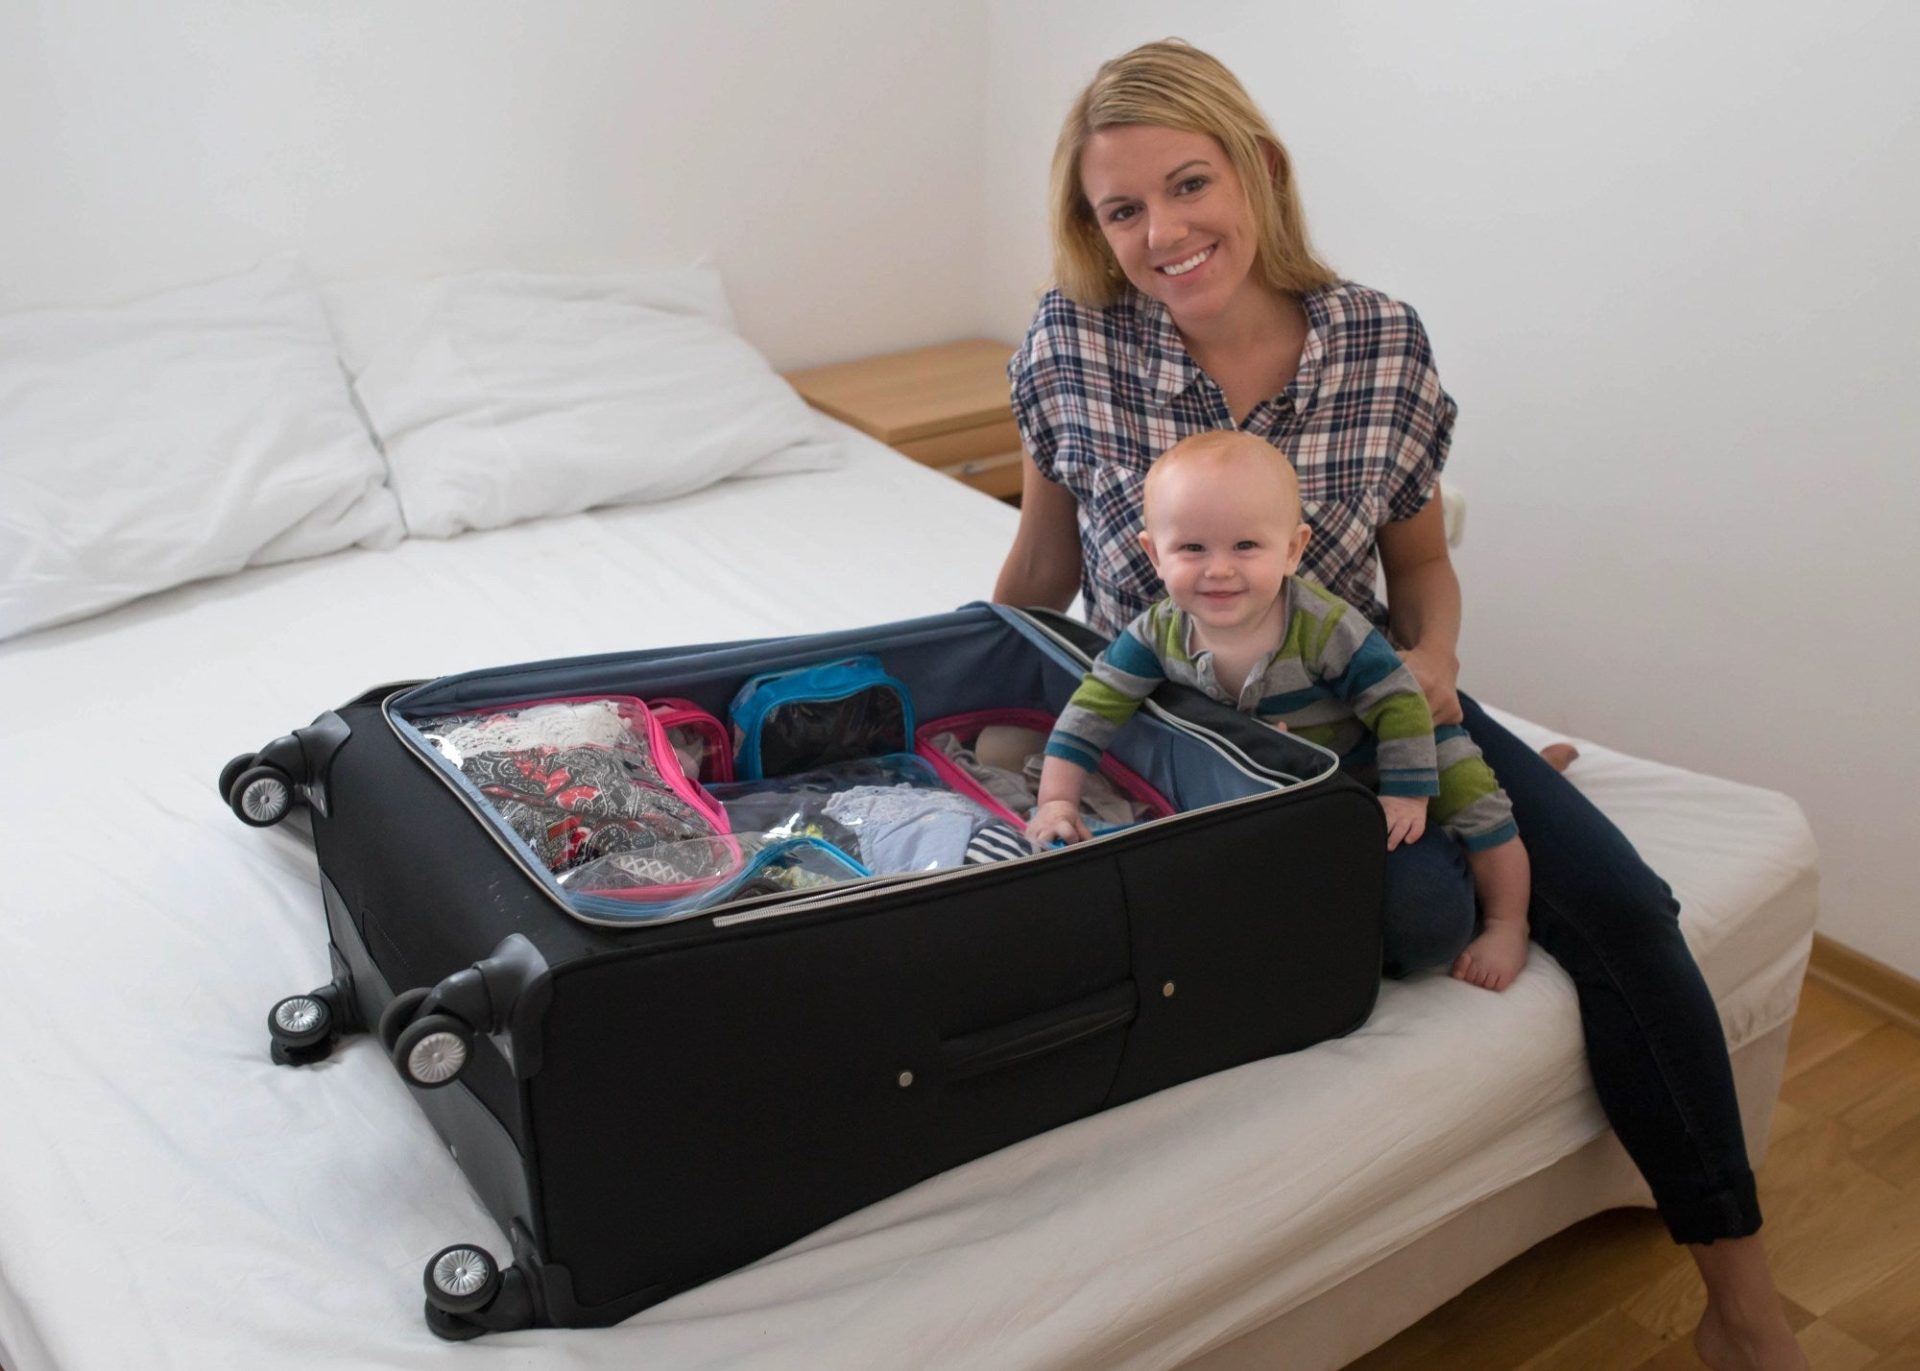 Mommy and baby packing for a trip